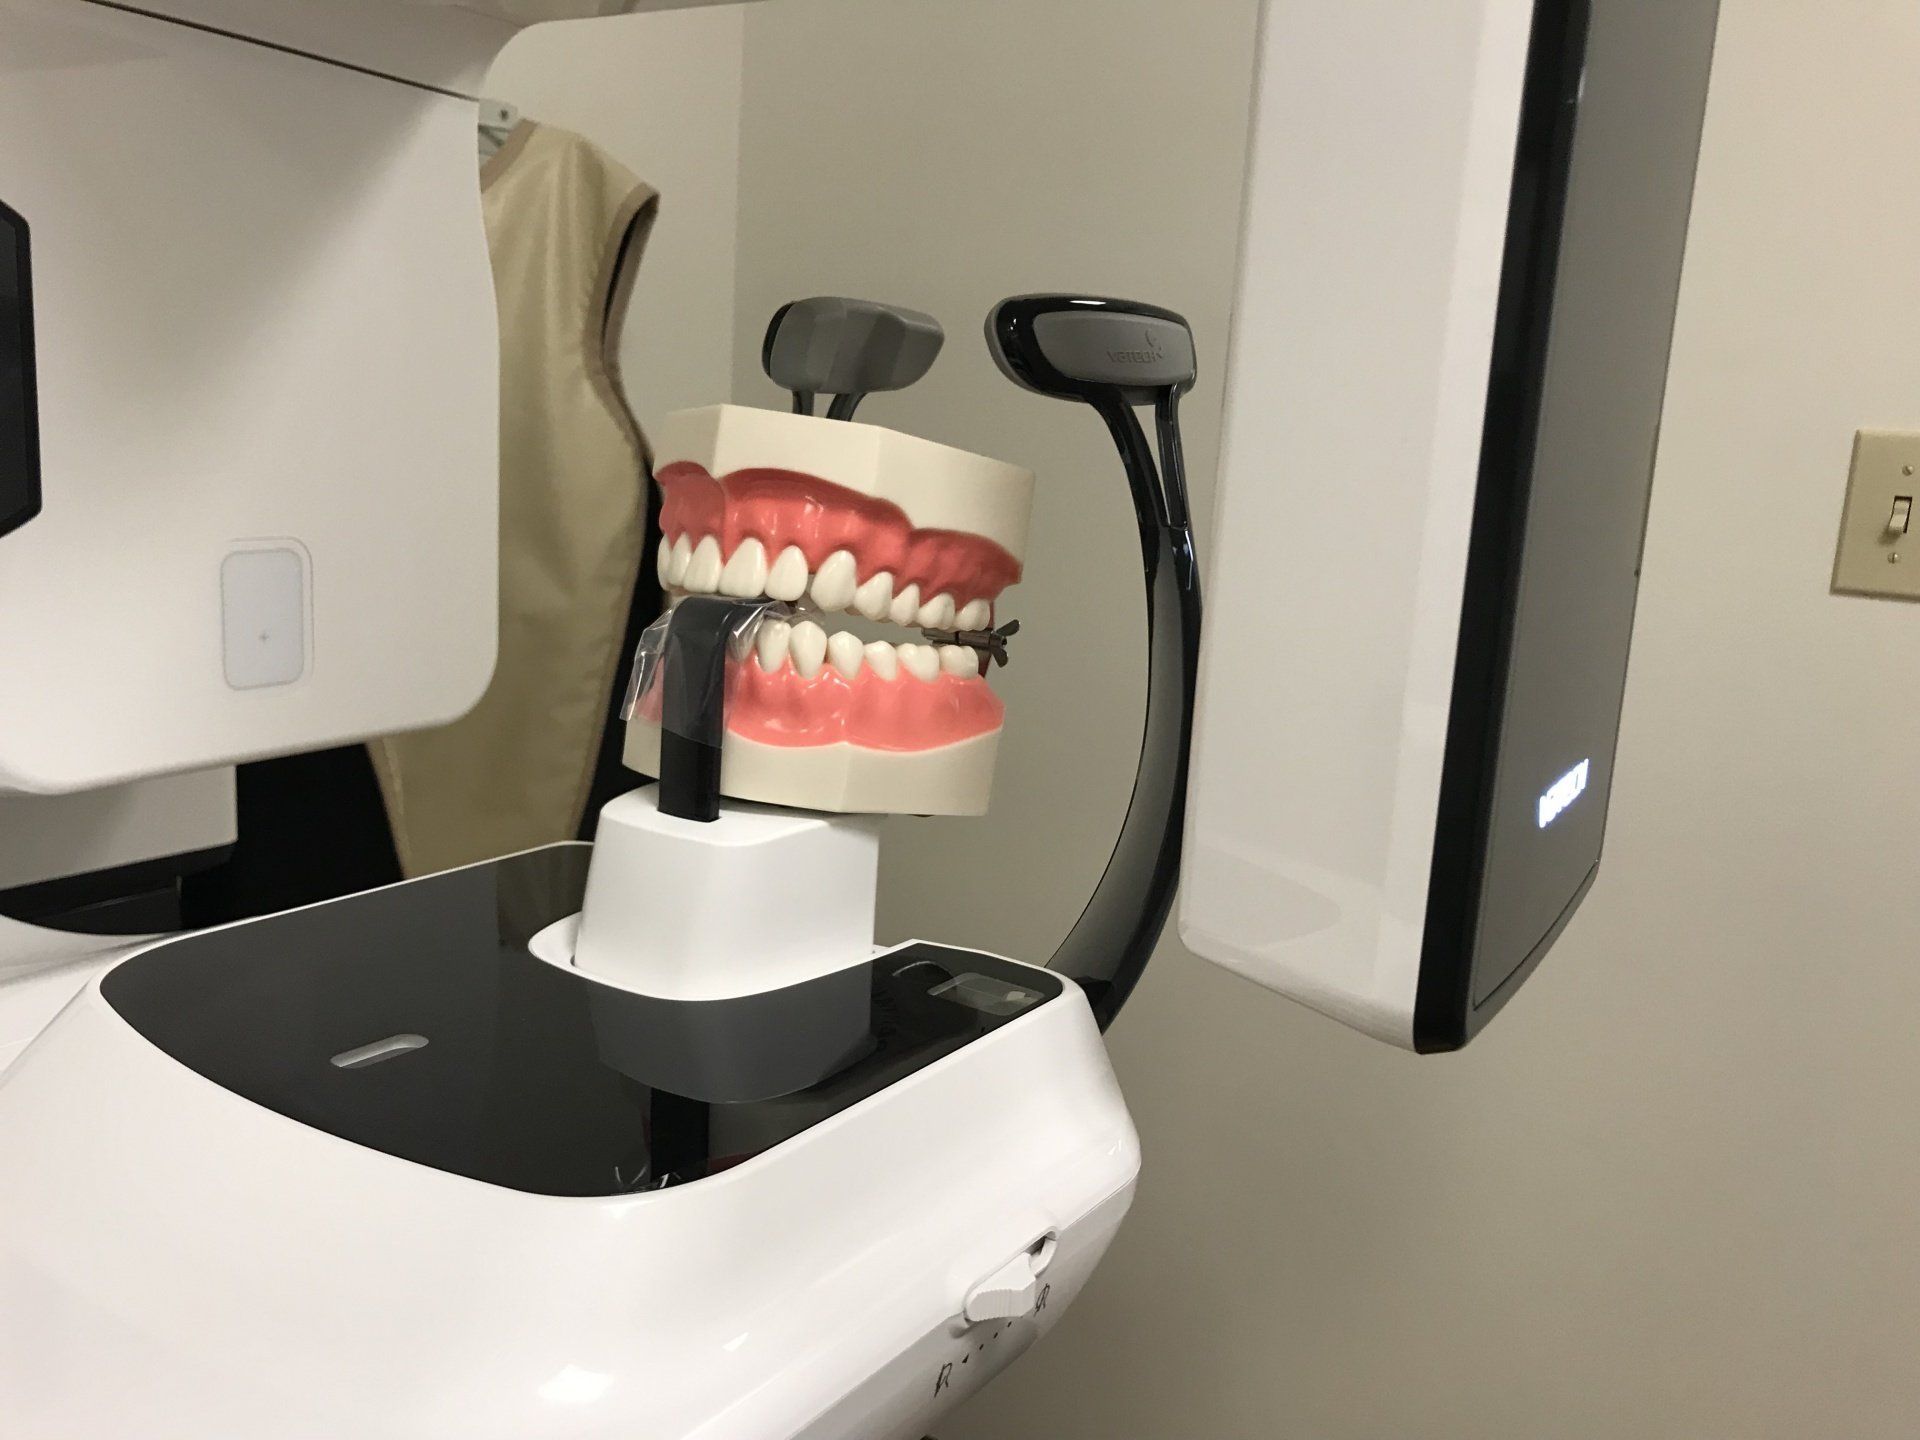 Dental model in position for 3D CBCT machine as a demonstration for a younger patient.